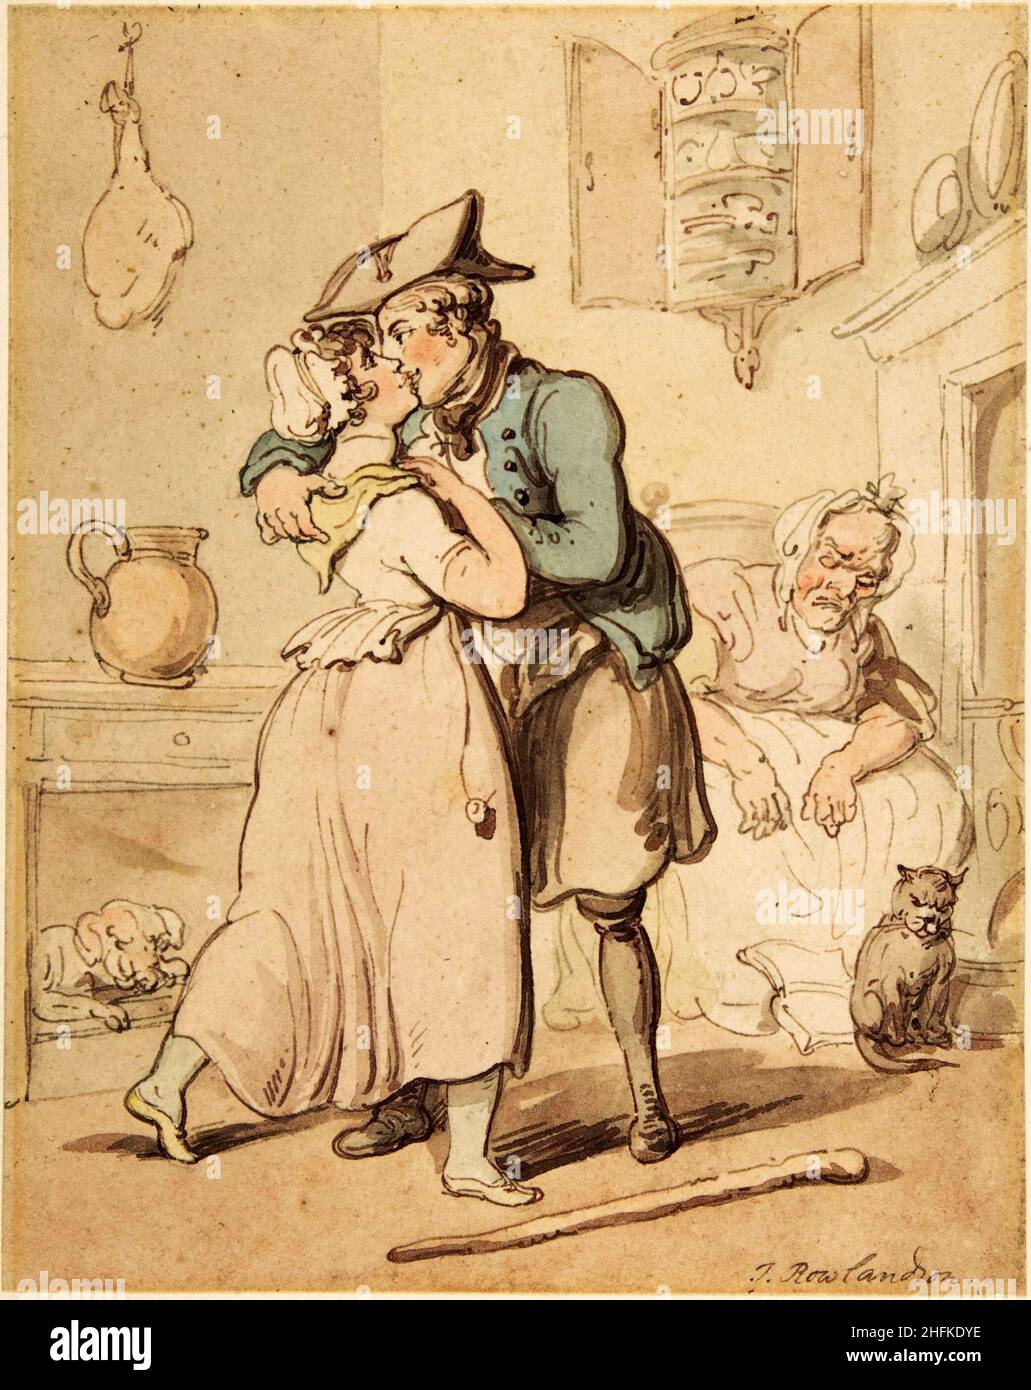 The sailors return from active service. Artist: Thomas Rowlandson (1756-1827) an English artist and caricaturist of the Georgian Era. A social observer, he was a prolific artist and print maker.  Credit: Thomas Rowlandson/Alamy Stock Photo